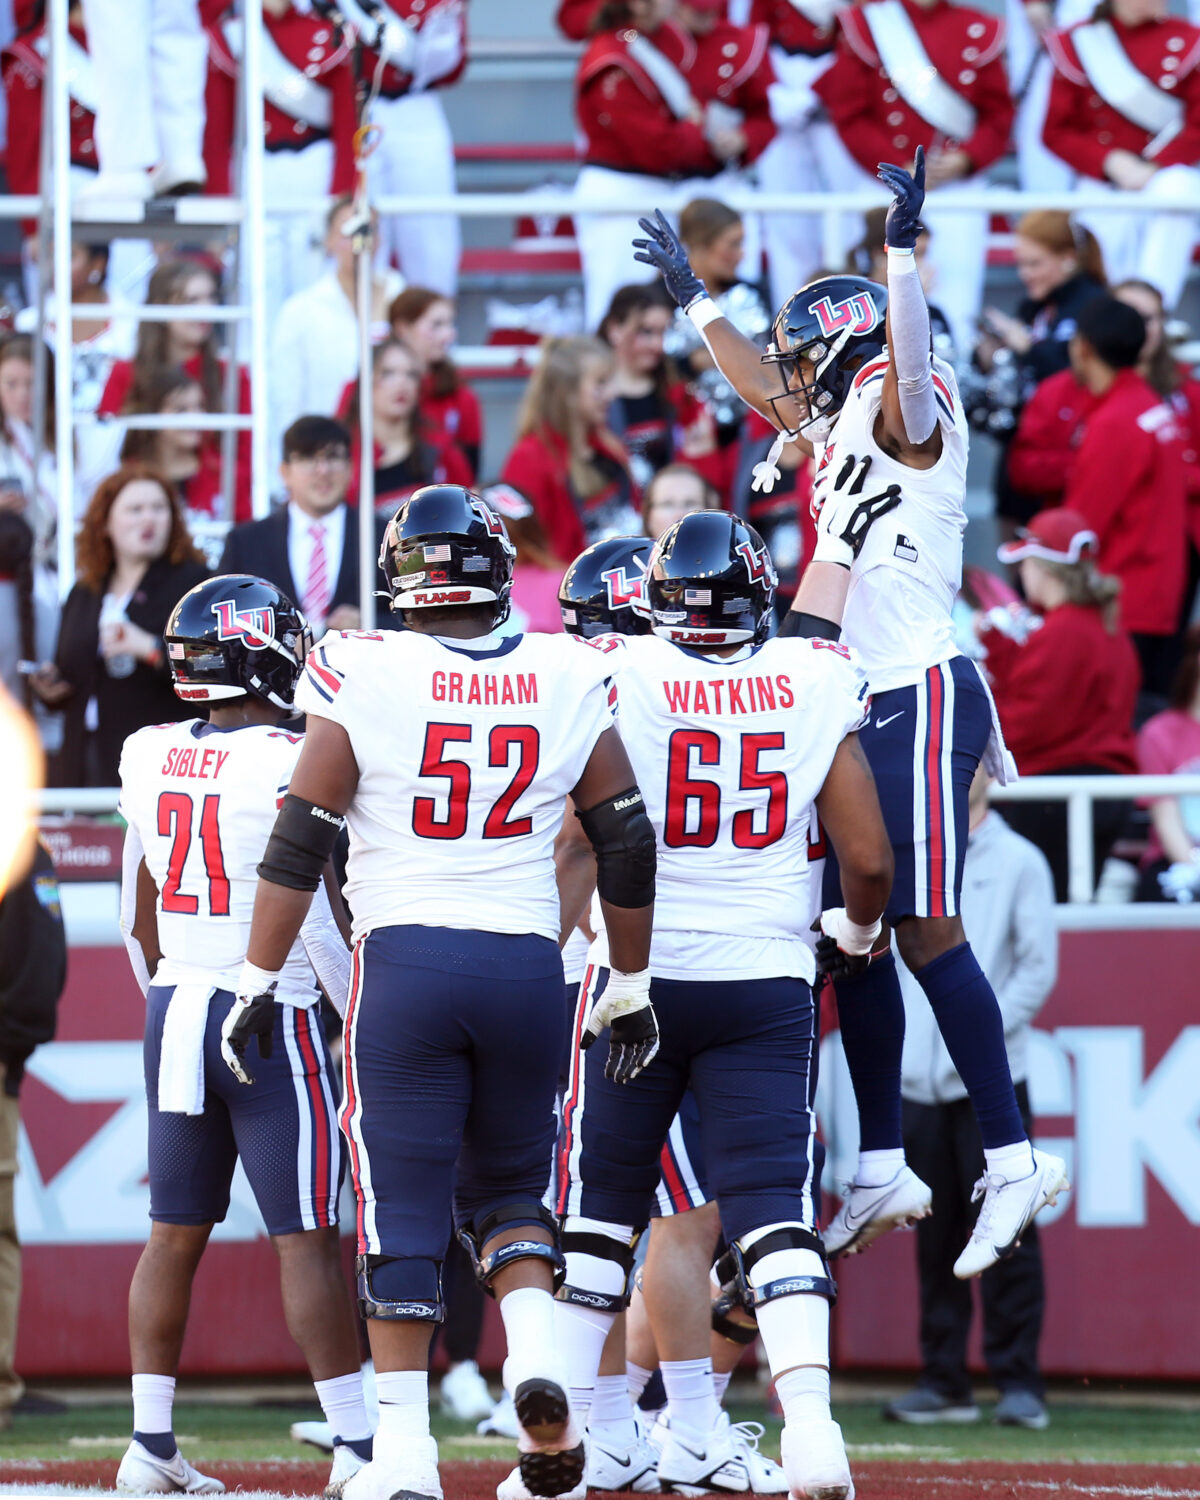 Arkansas’ bowl chances take serious hit in embarrassing loss to Liberty